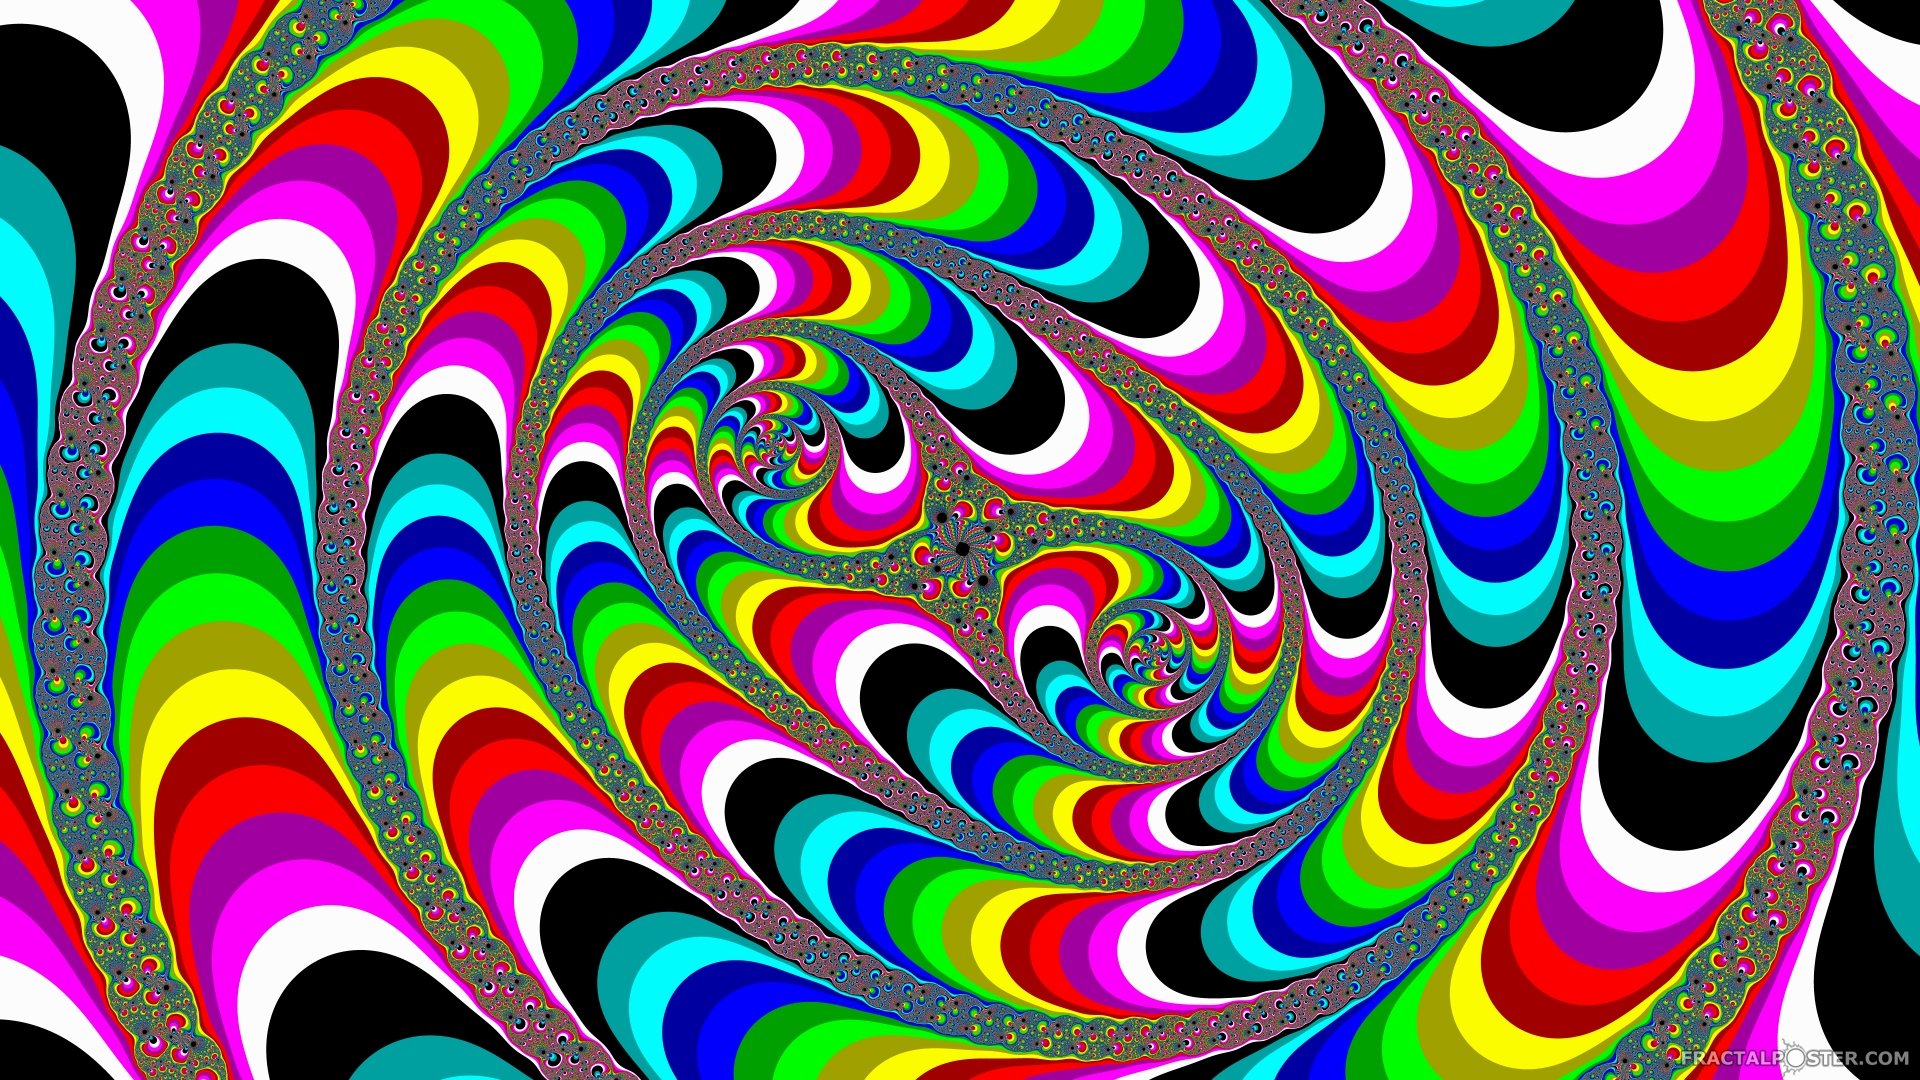 Psychedelic Trippy Art Wallpapers